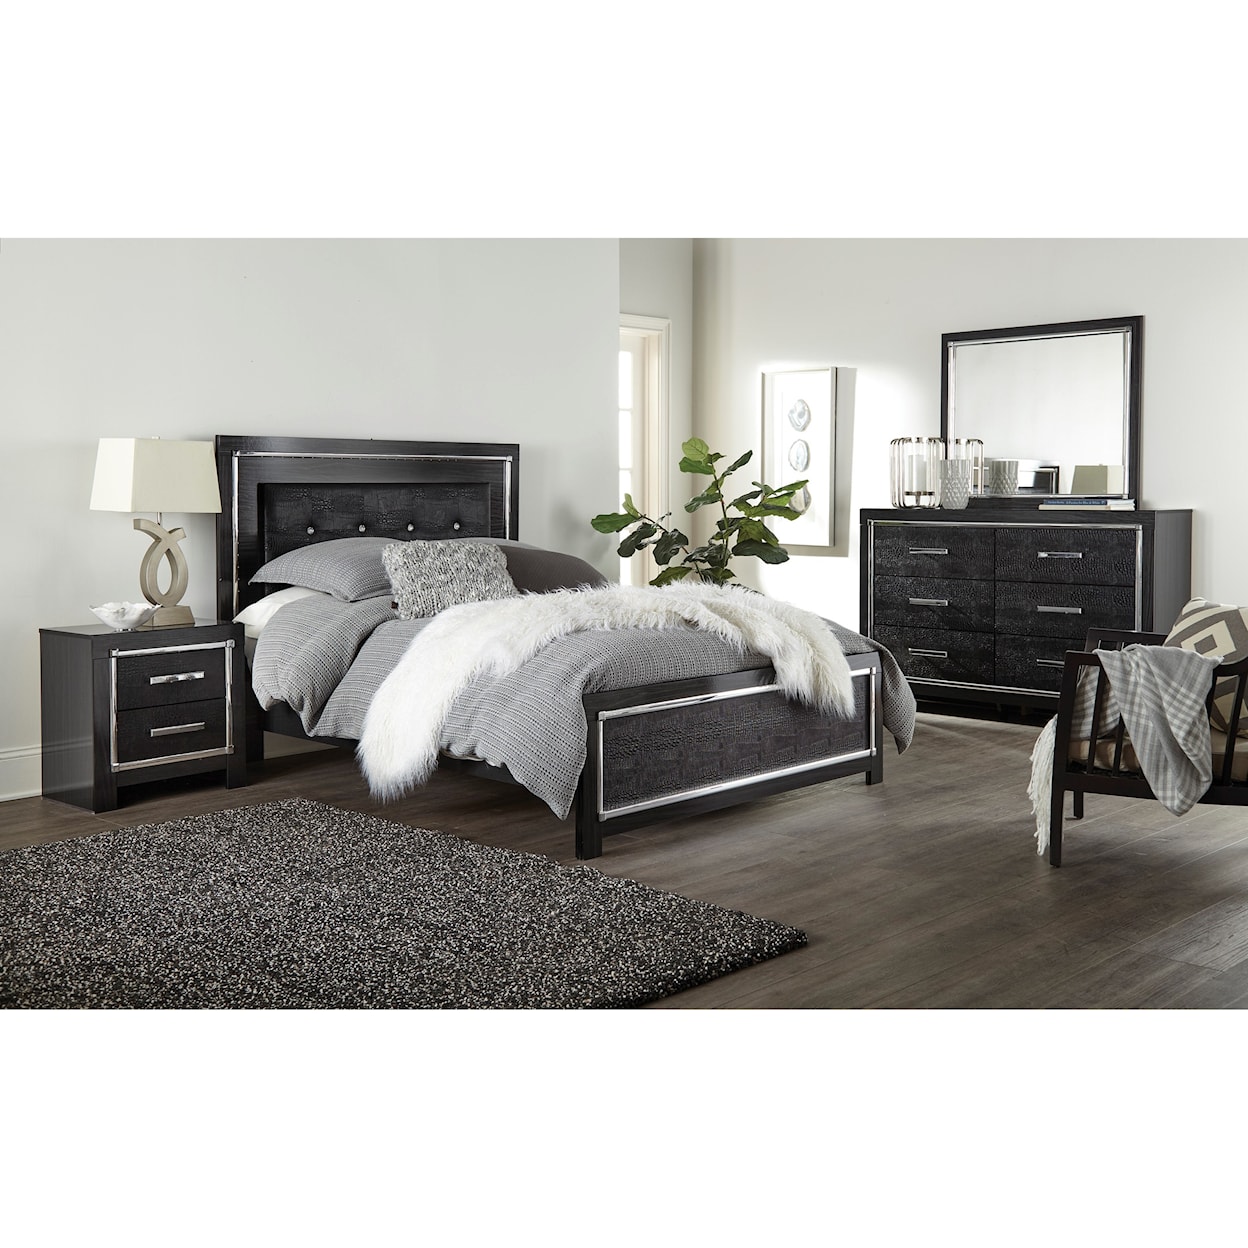 Signature Design by Ashley Kaydell 6PC King Bedroom Group